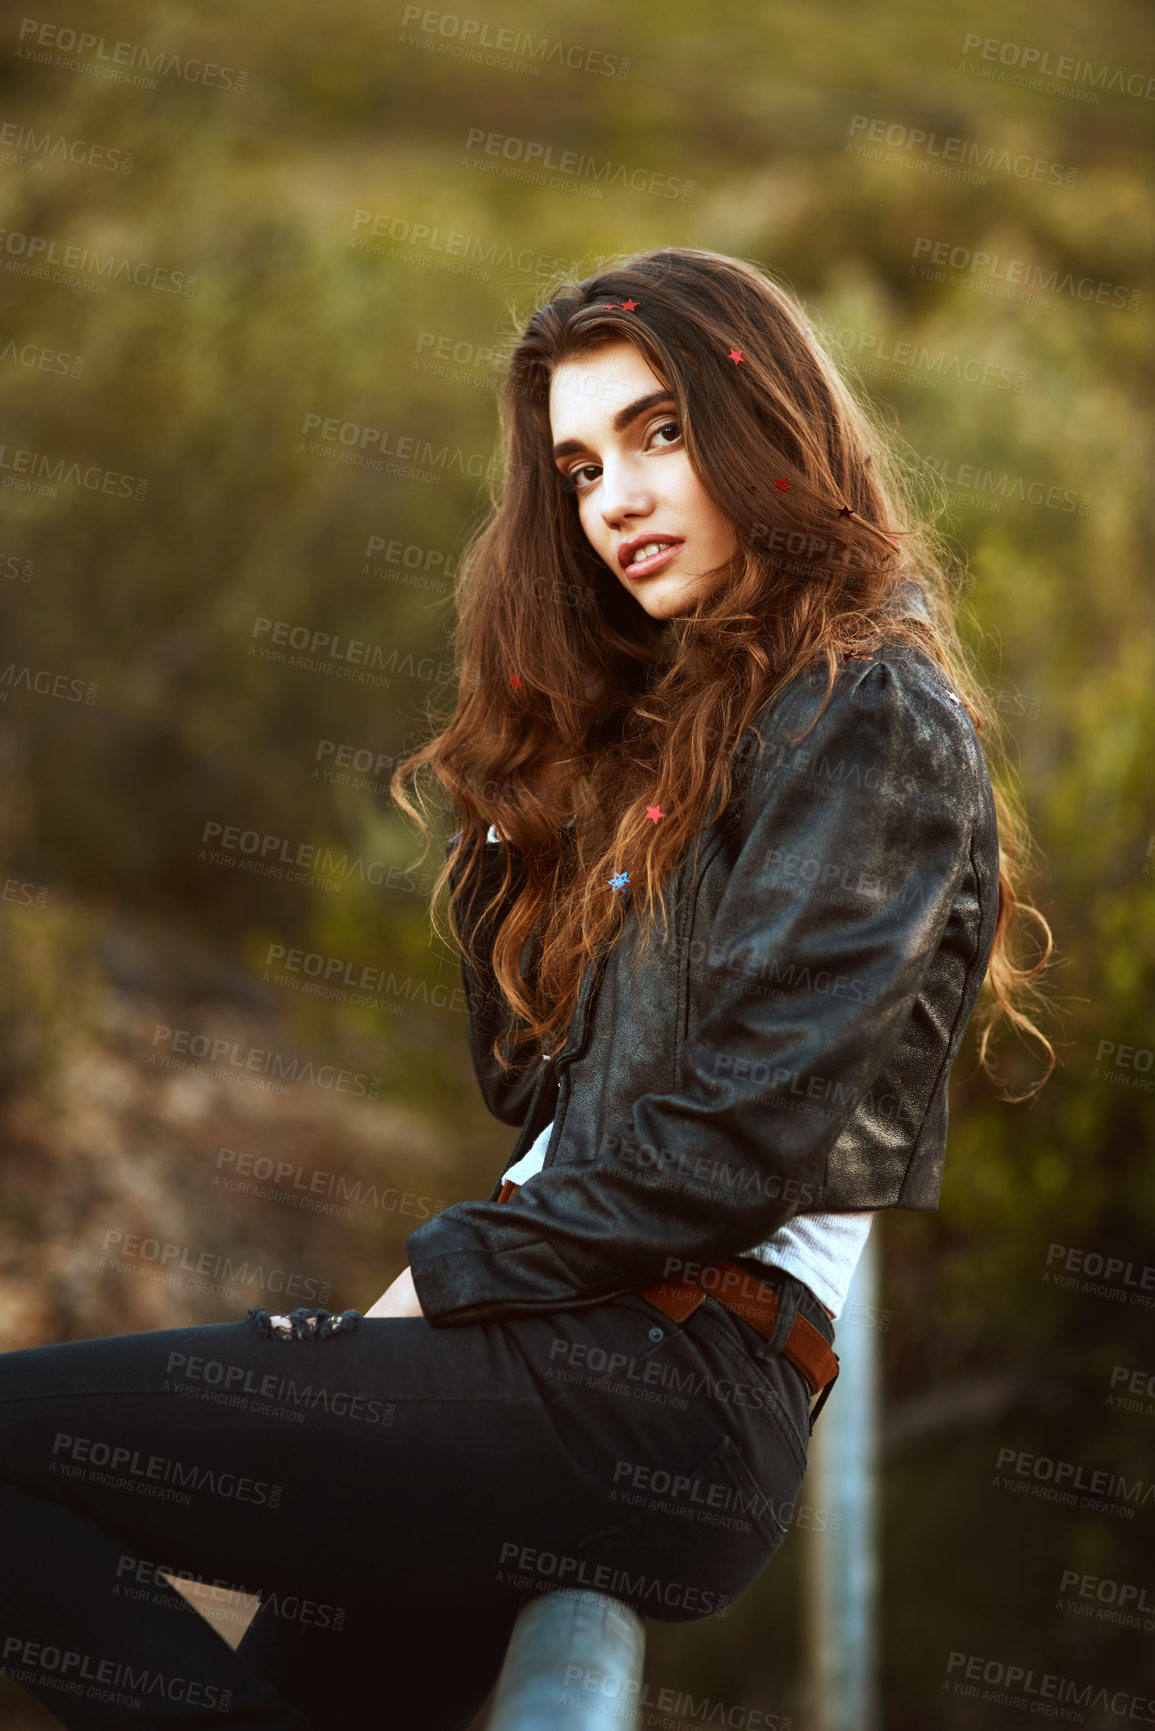 Buy stock photo Portrait of an attractive and stylish young woman spending some time outdoors